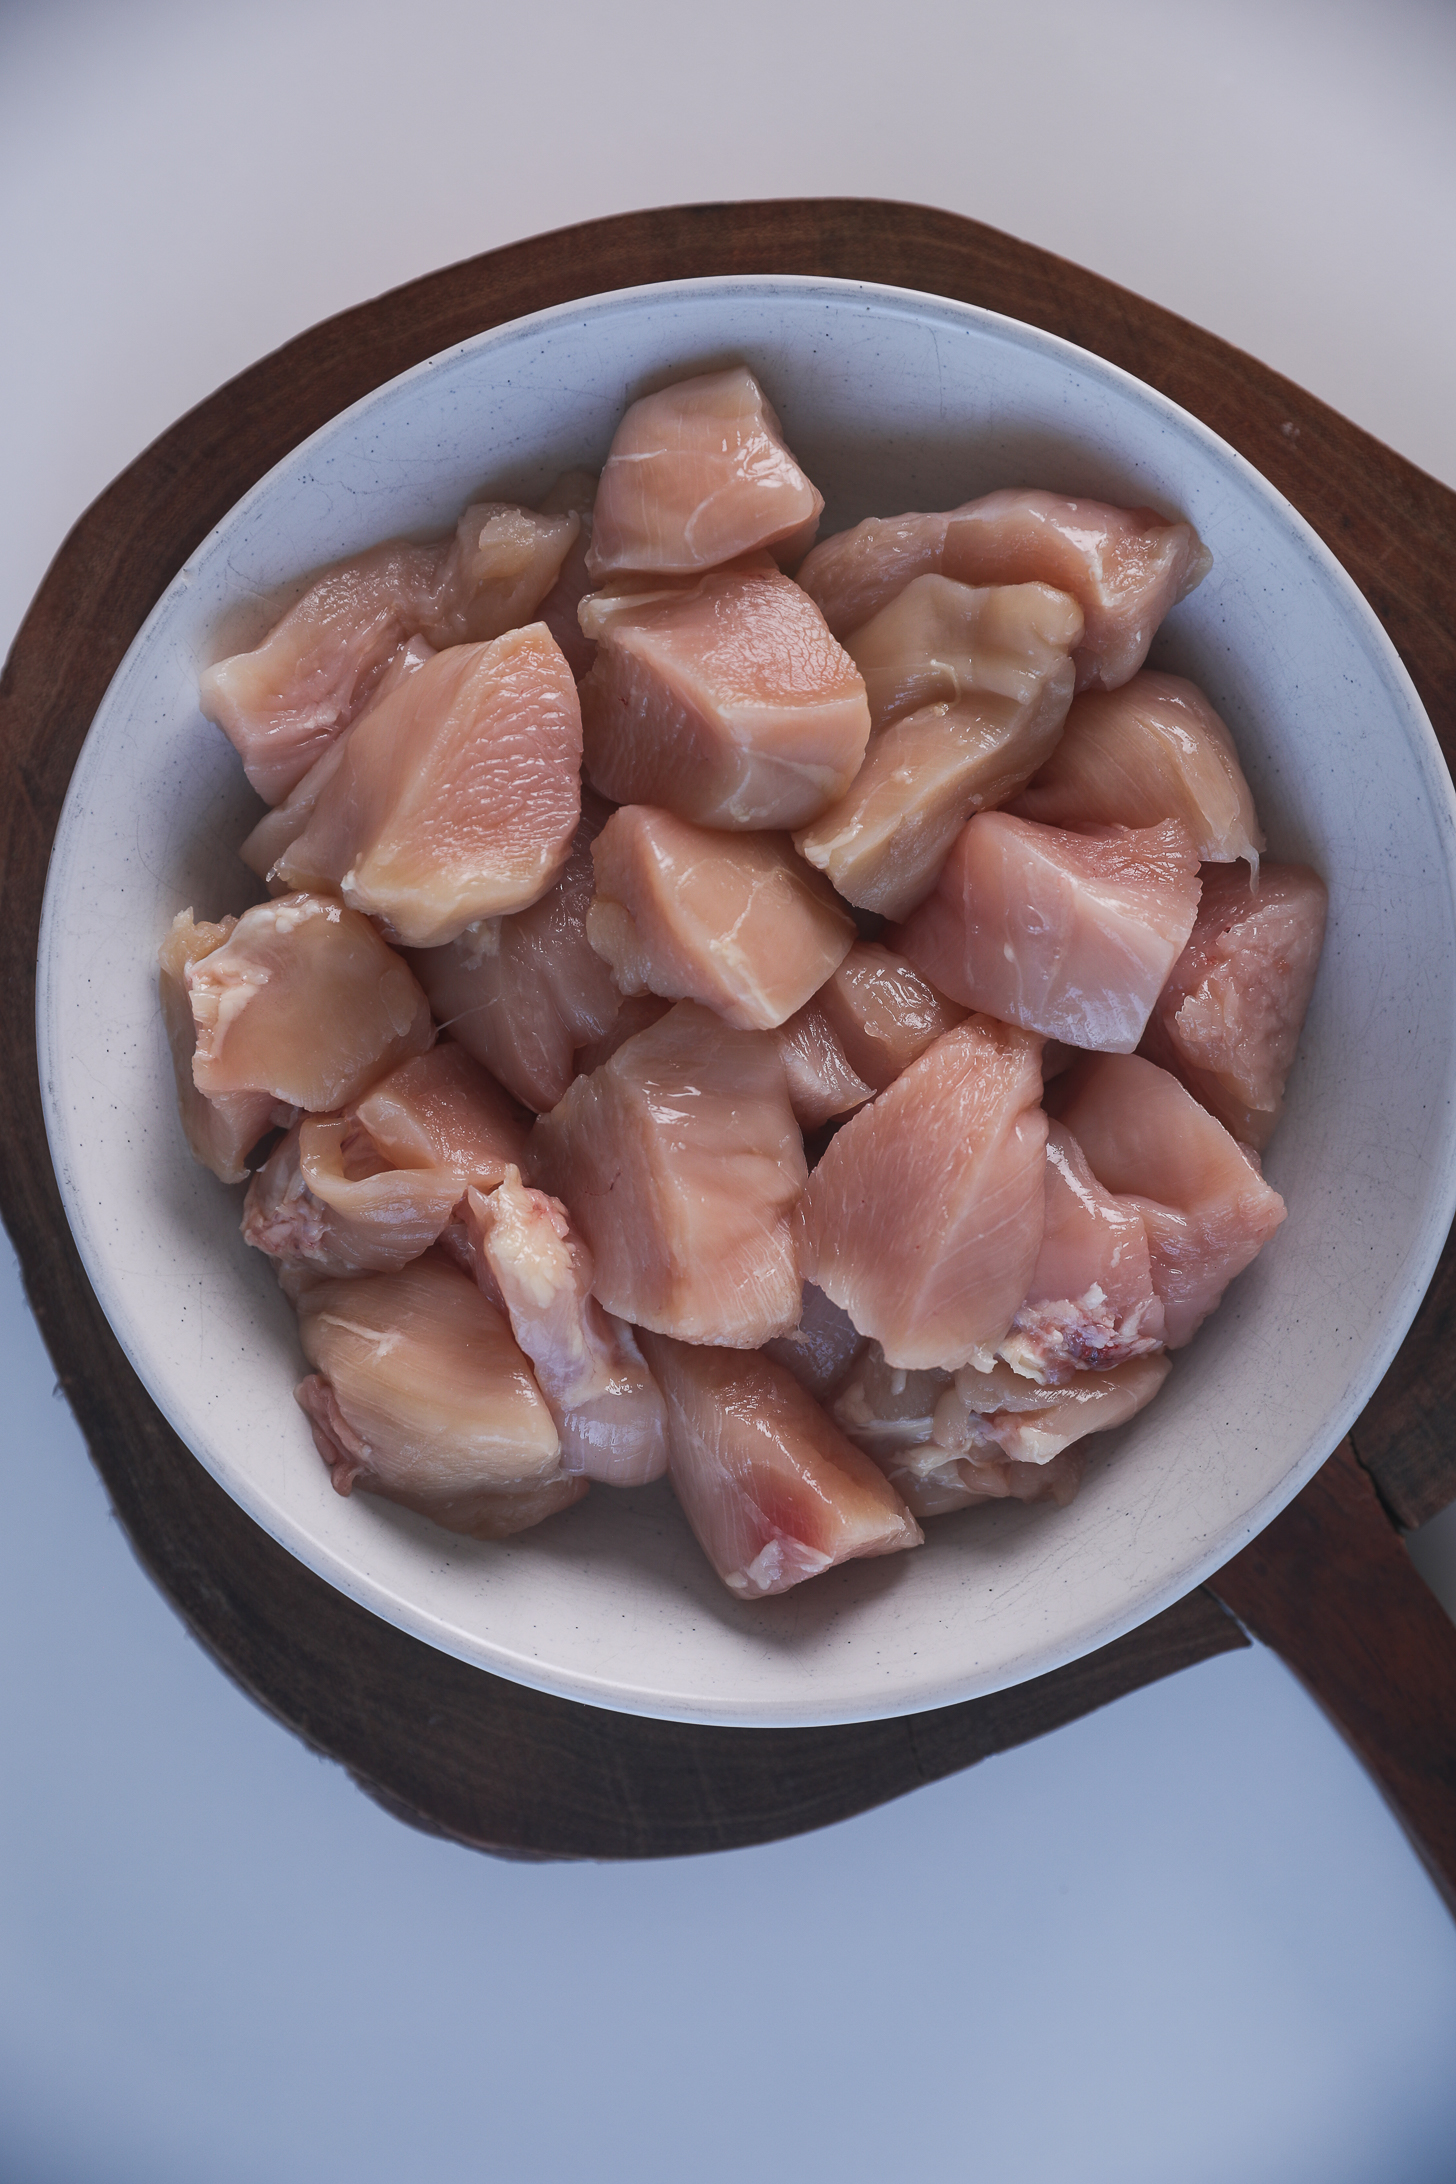 A bowl of chicken breast pieces placed on a wooden board against a white background.